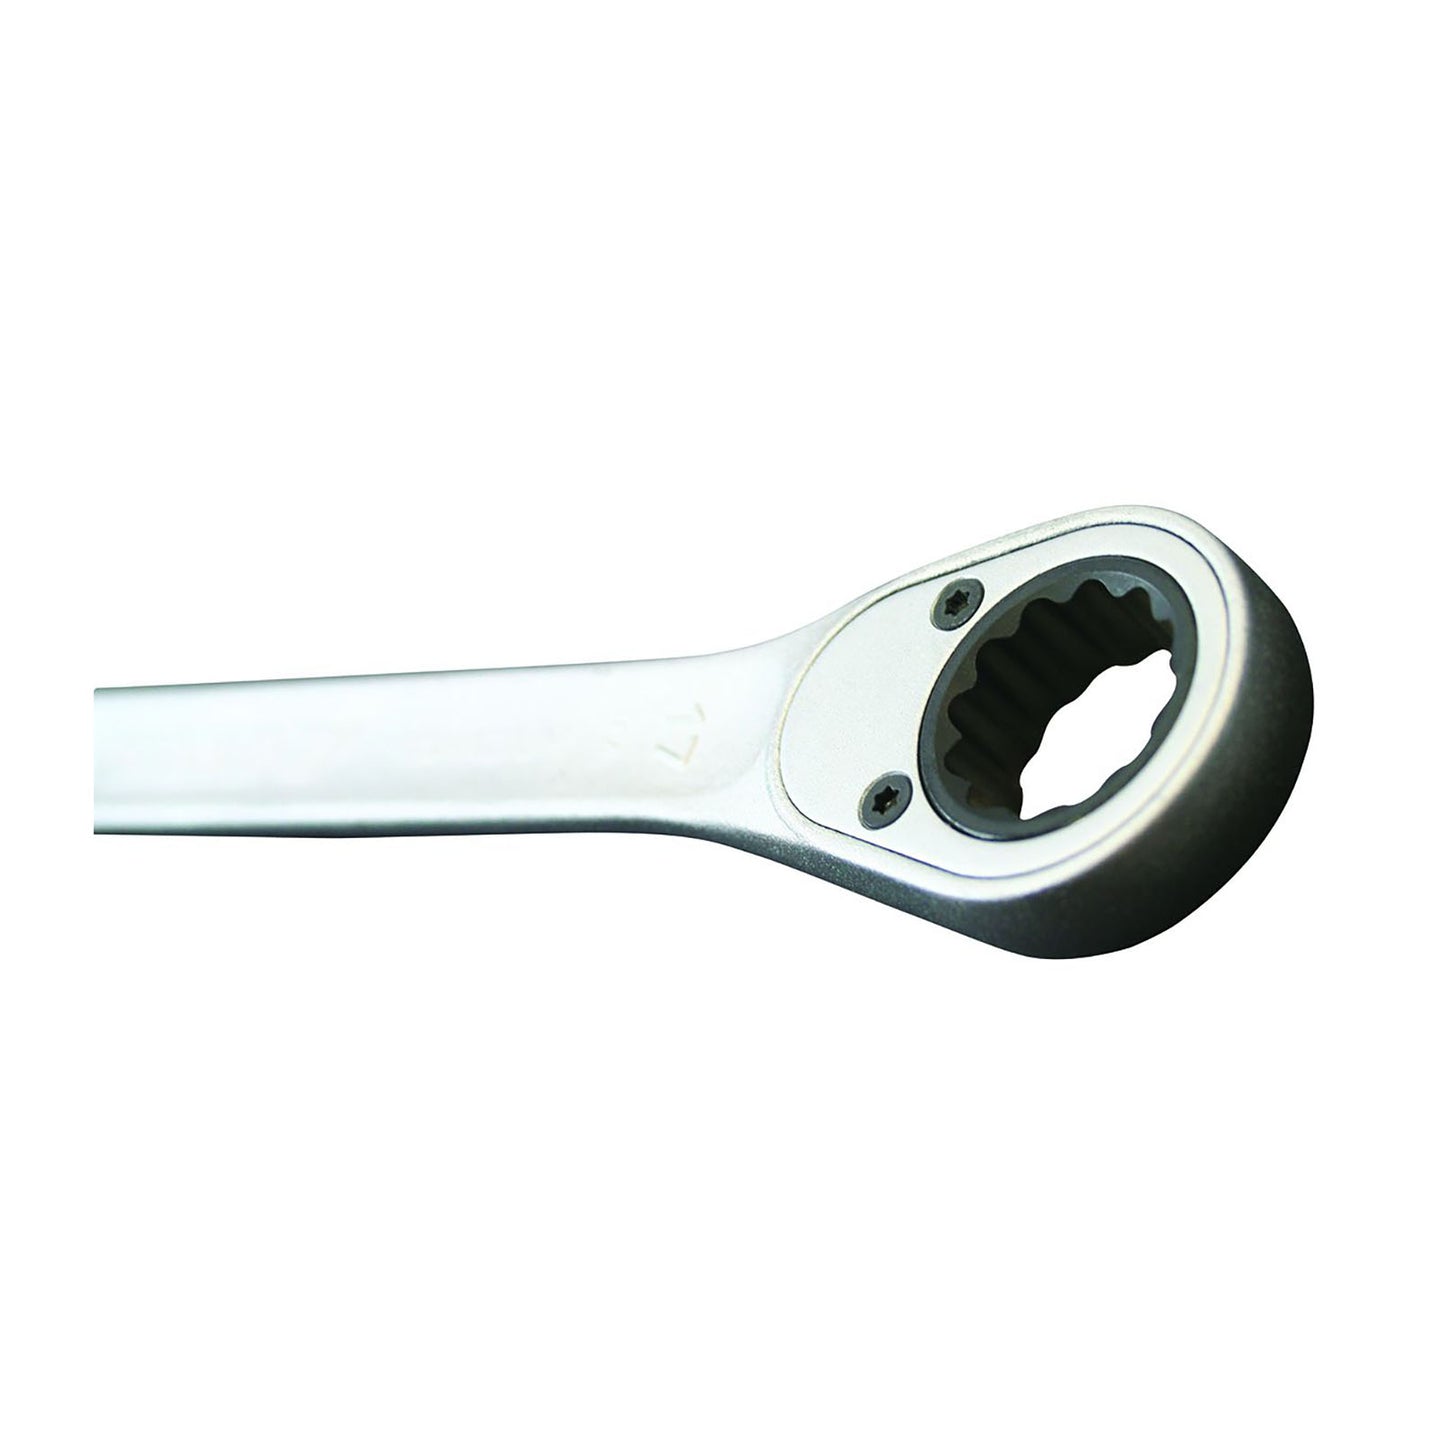 GEDORE 7 R 30 - Ratchet combination wrench, 30mm (2297221)